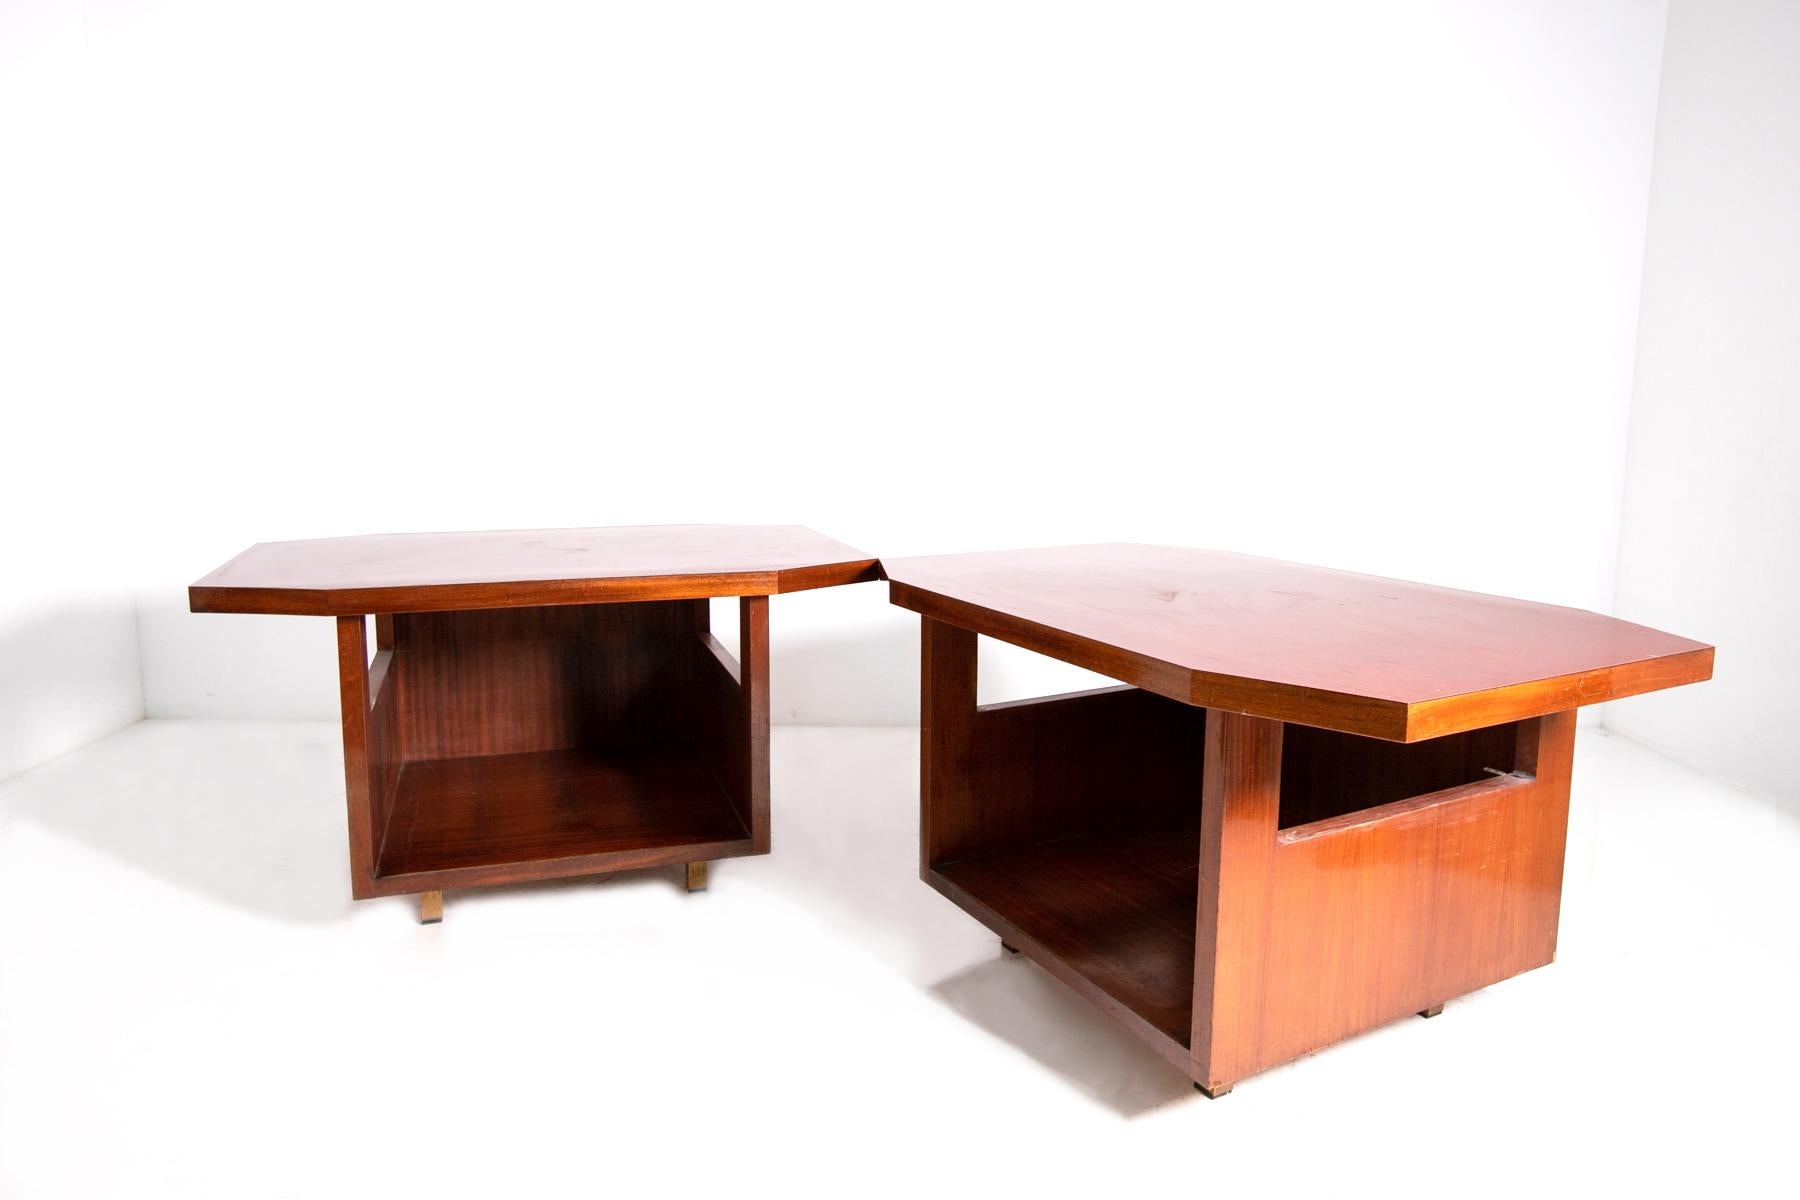 Stunning pair of Italian modular console designed by architect Vito Sangirardi for the Pallante store in Bari, Palo del Colle, Italy in 1950.
The pair of consoles were made with sturdy and fine mahogany wood, laminated brass was used for the